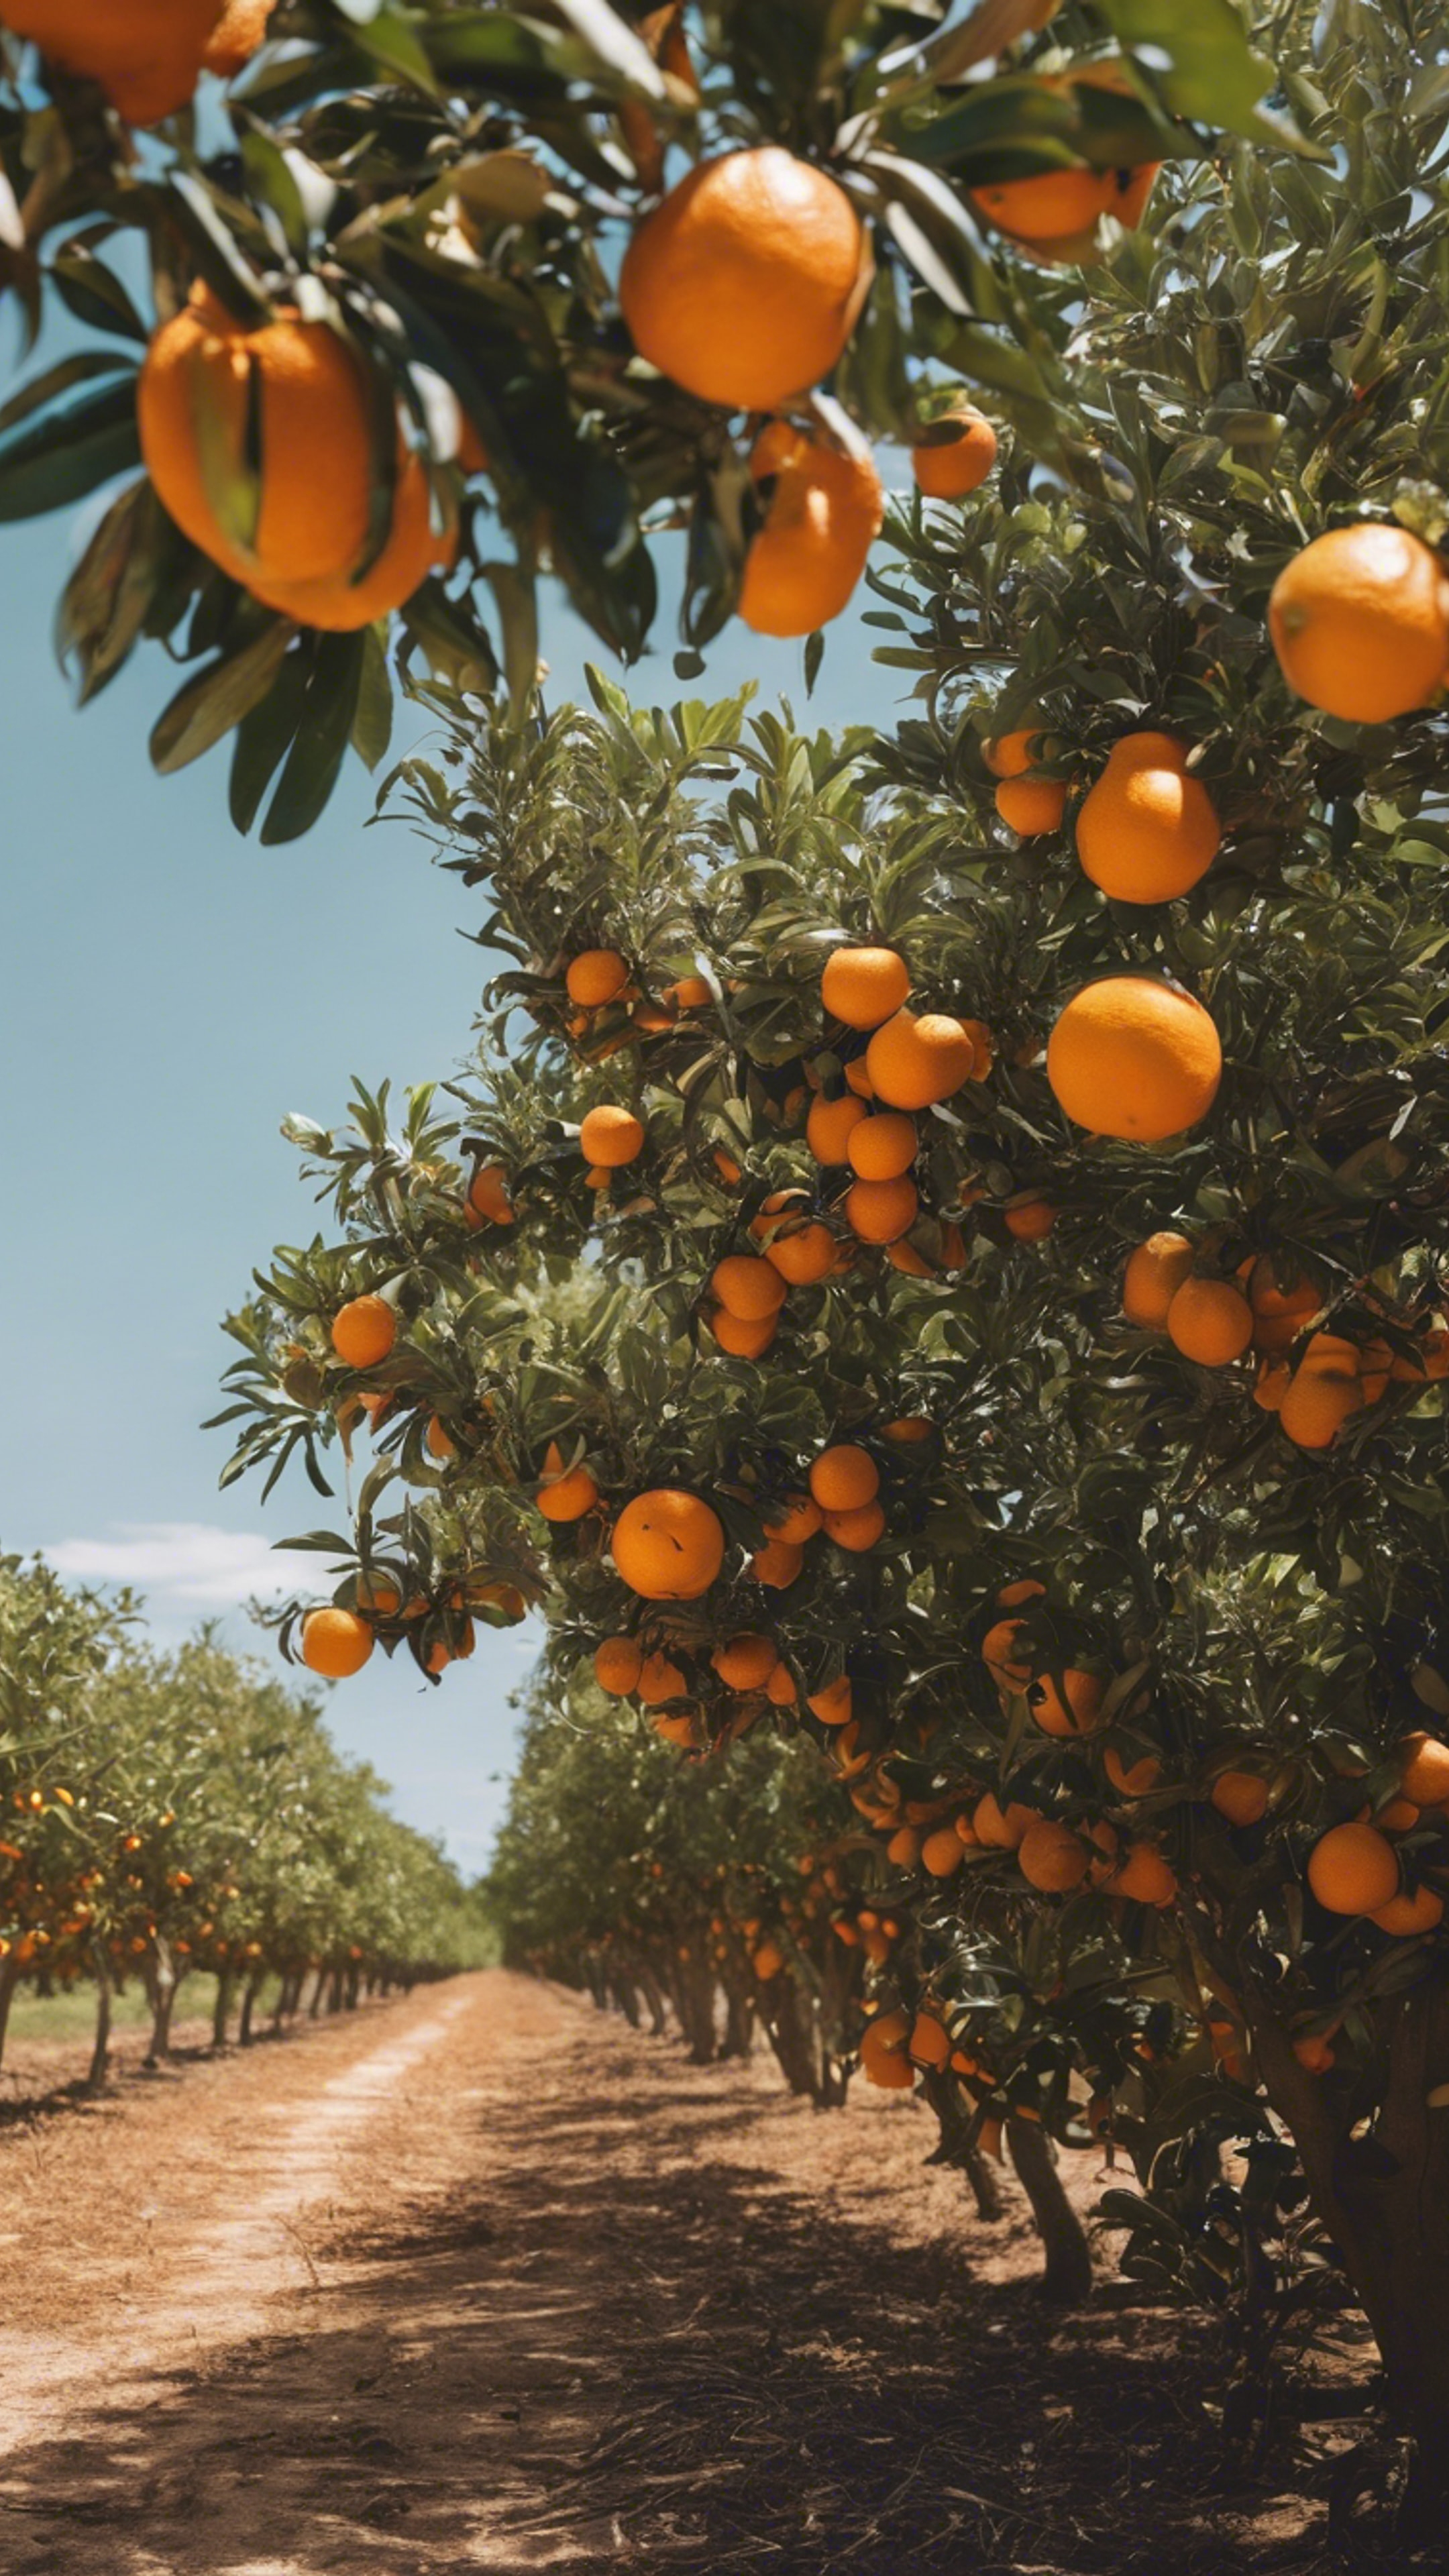 A Florida orange grove heavy with ripe fruit under a clear, sunny sky.壁紙[2198d7c823f5473d98f1]